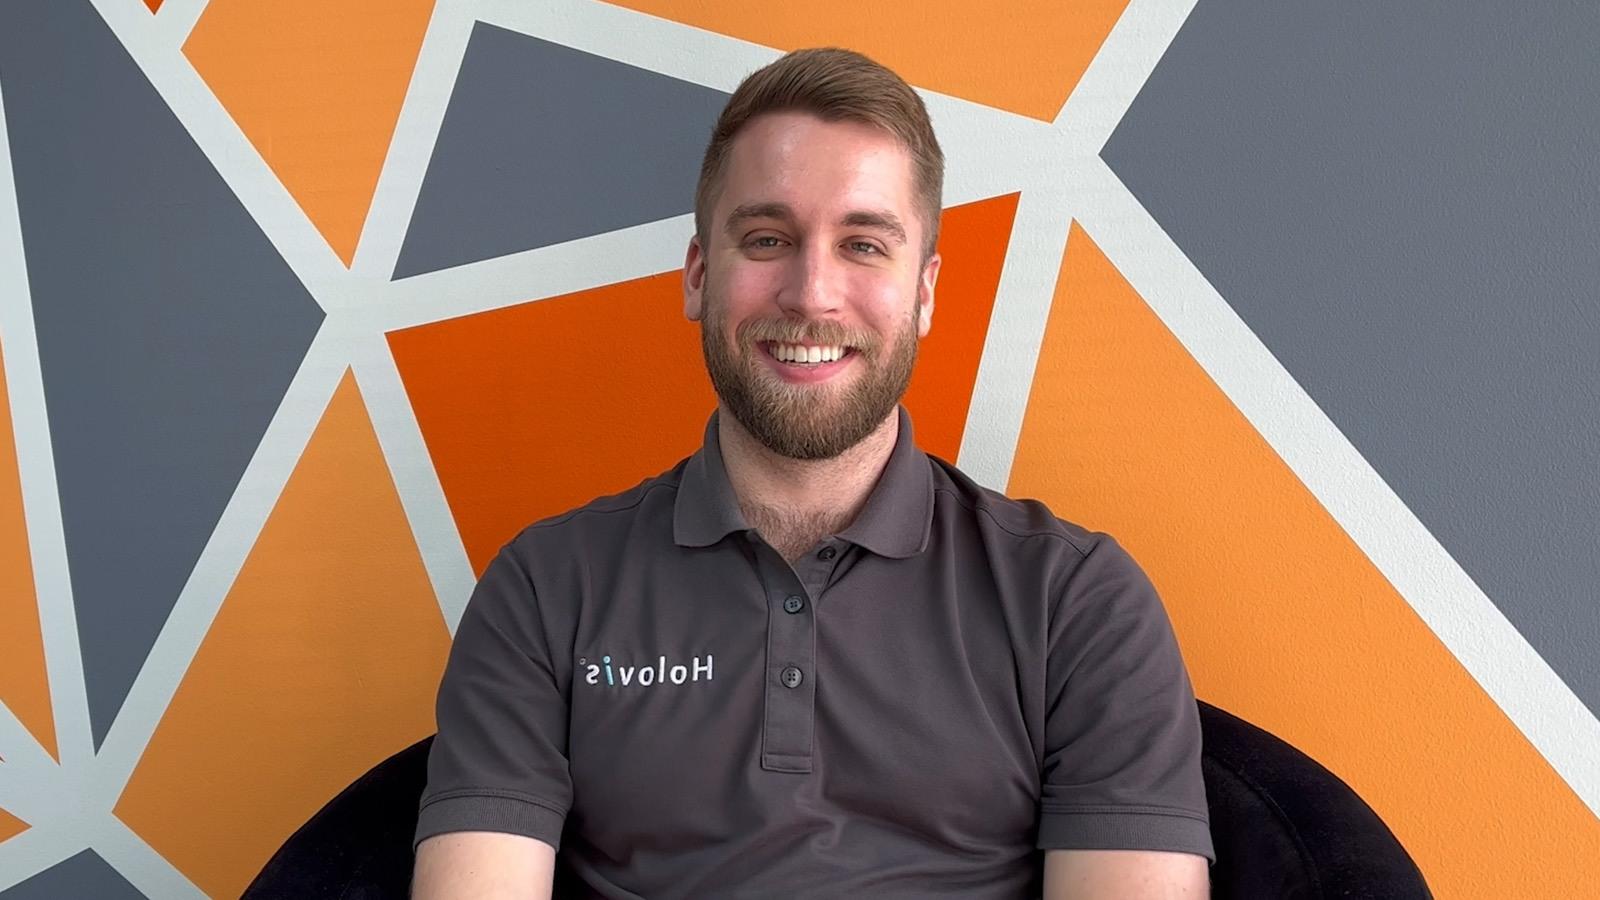 A man with light hair and a beard wearing a grey Holovis polo while seated and smiling in front of an orange, grey, and white geometric background.